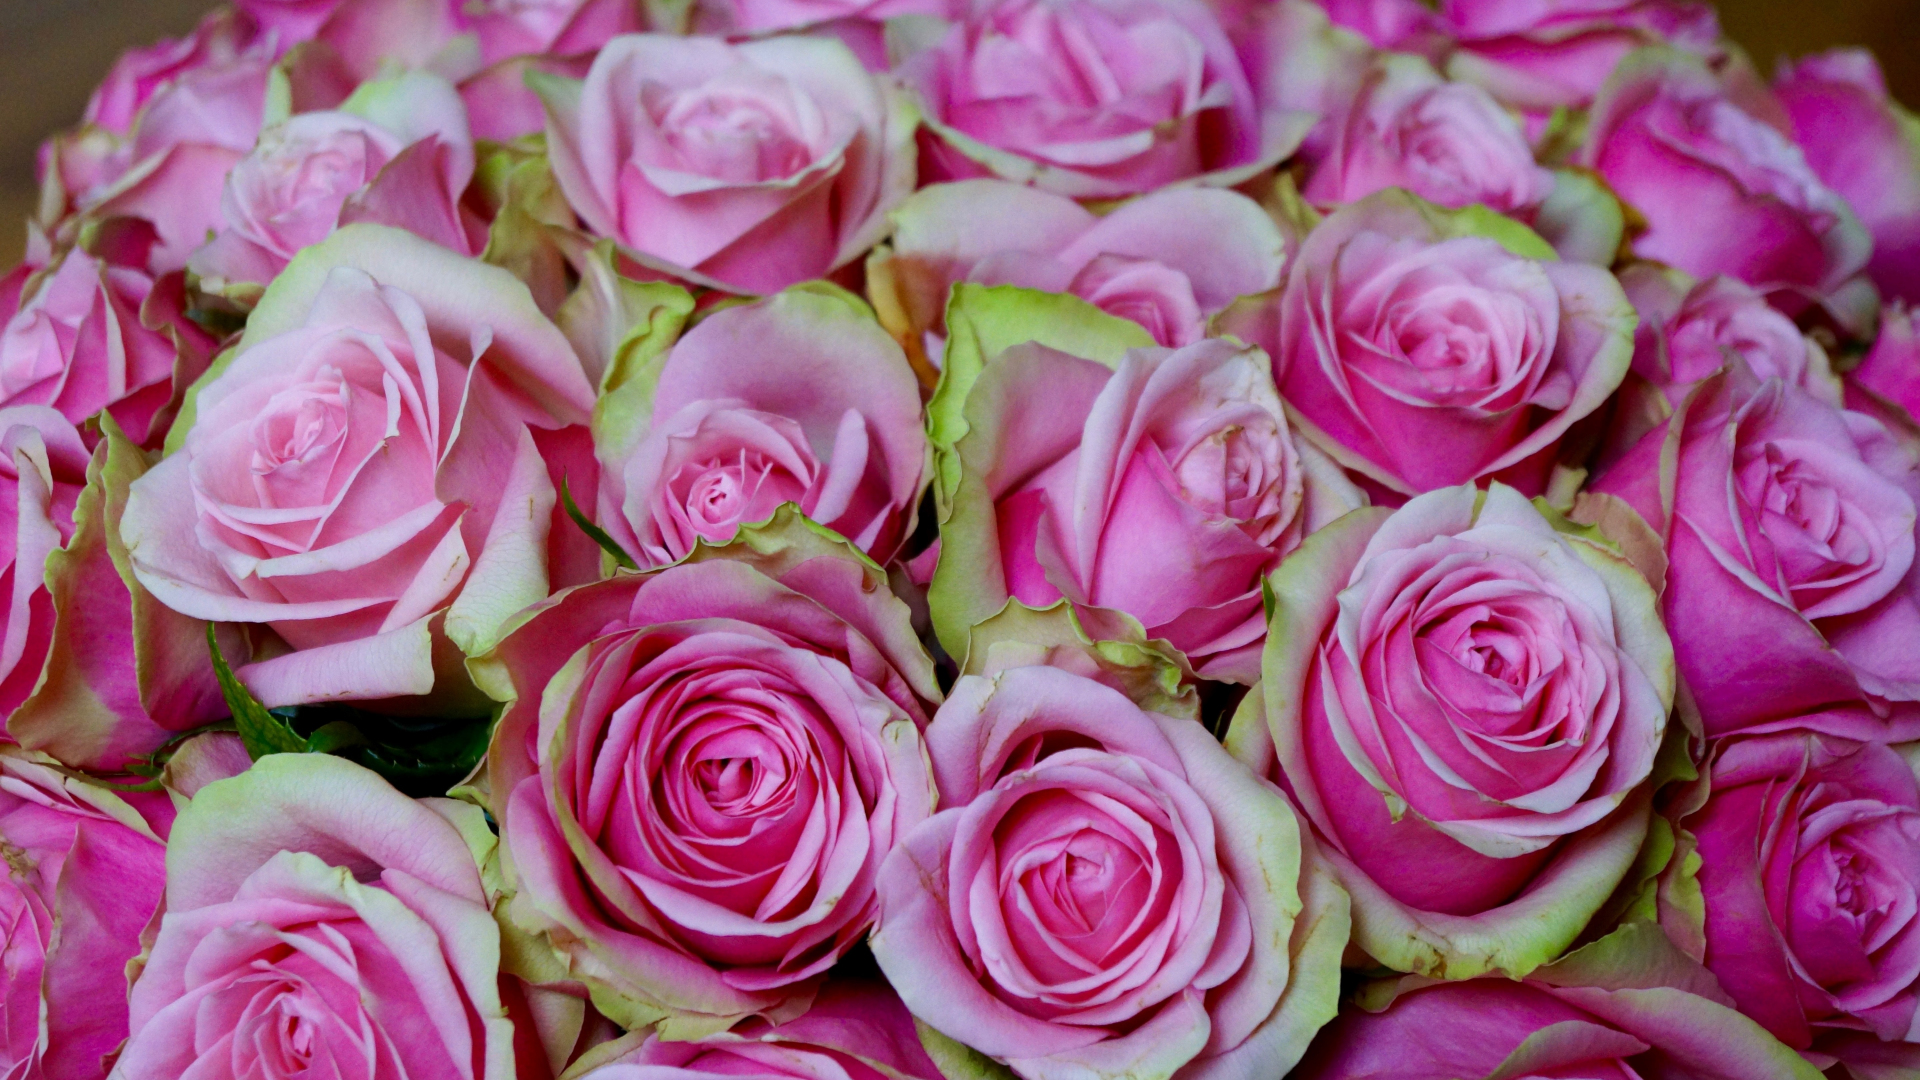 Rose Flower Images Hd Wallpapers 1080p Download - Get ...